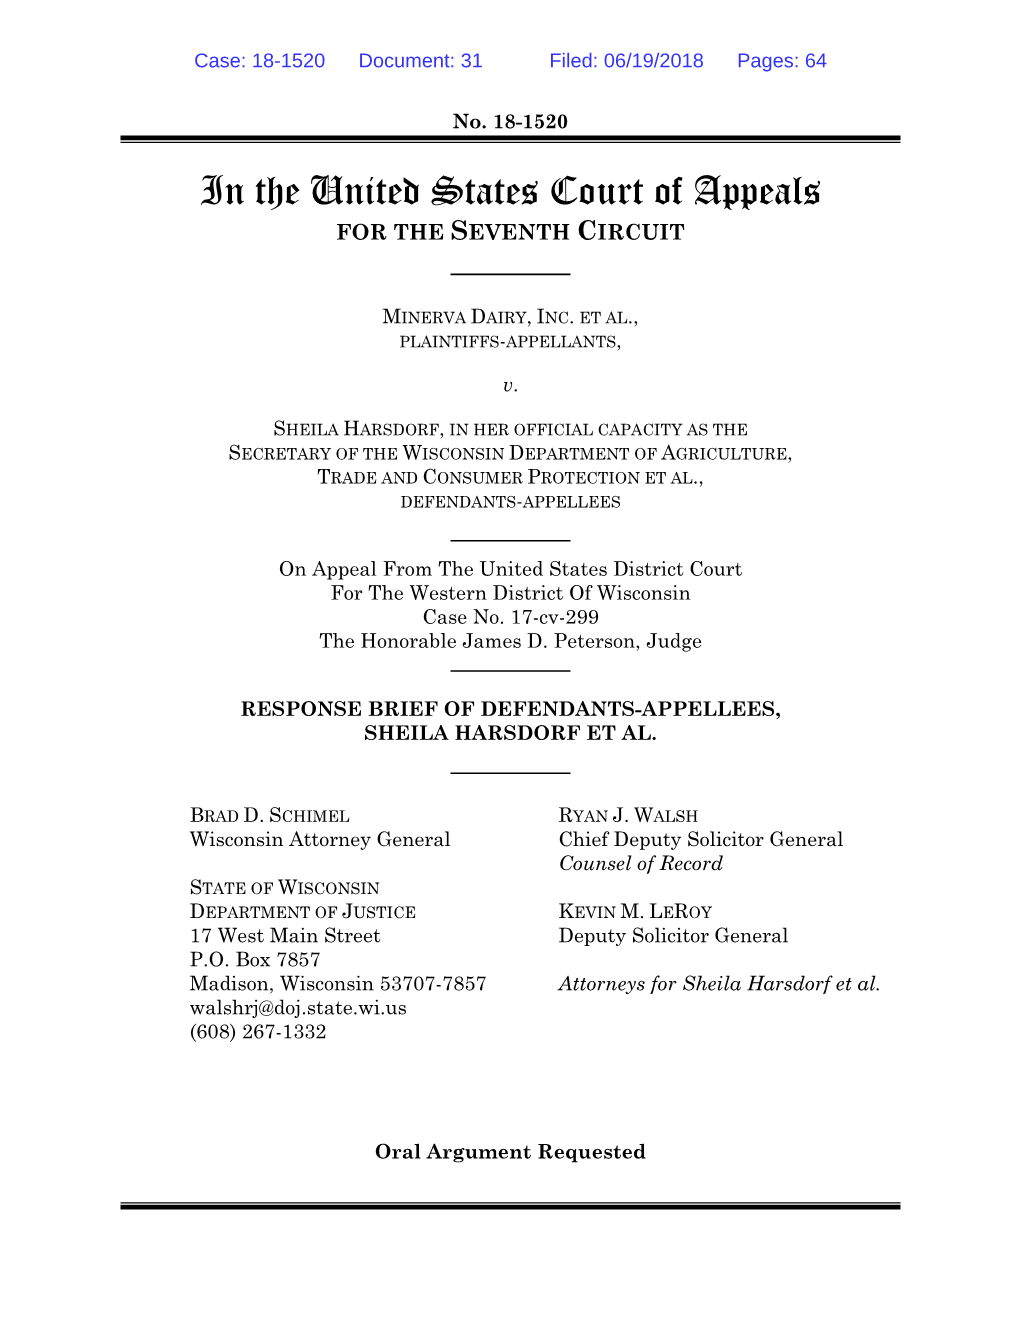 Appellees' Brief Filed in the United States Court of Appeals for The